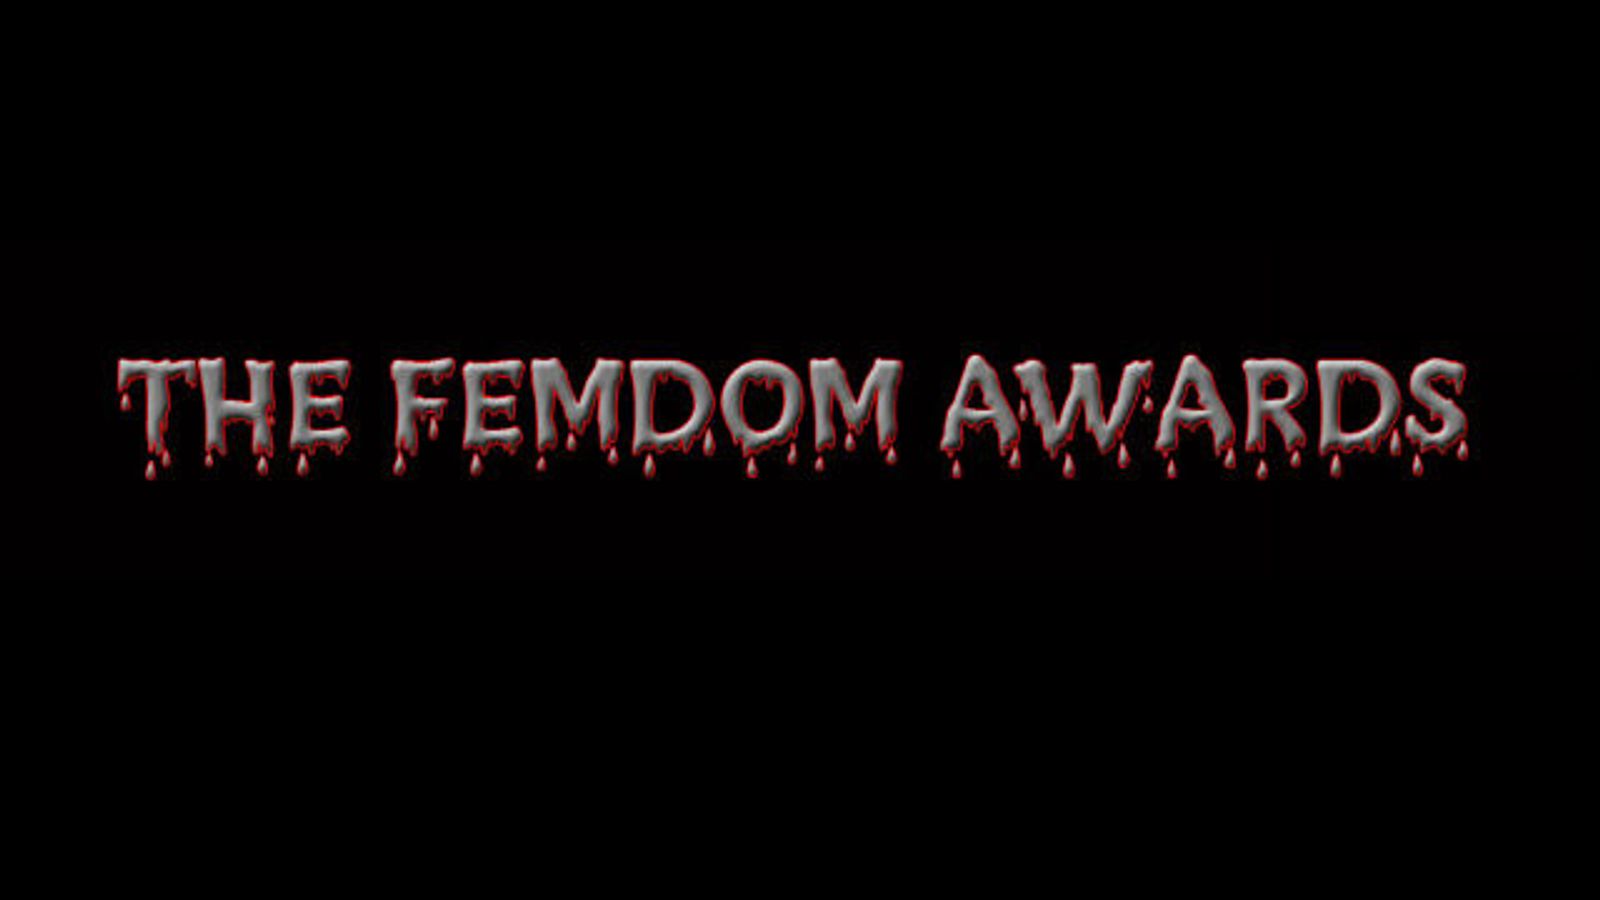 King Adult Broadcast Network Announces Femdom Awards Show